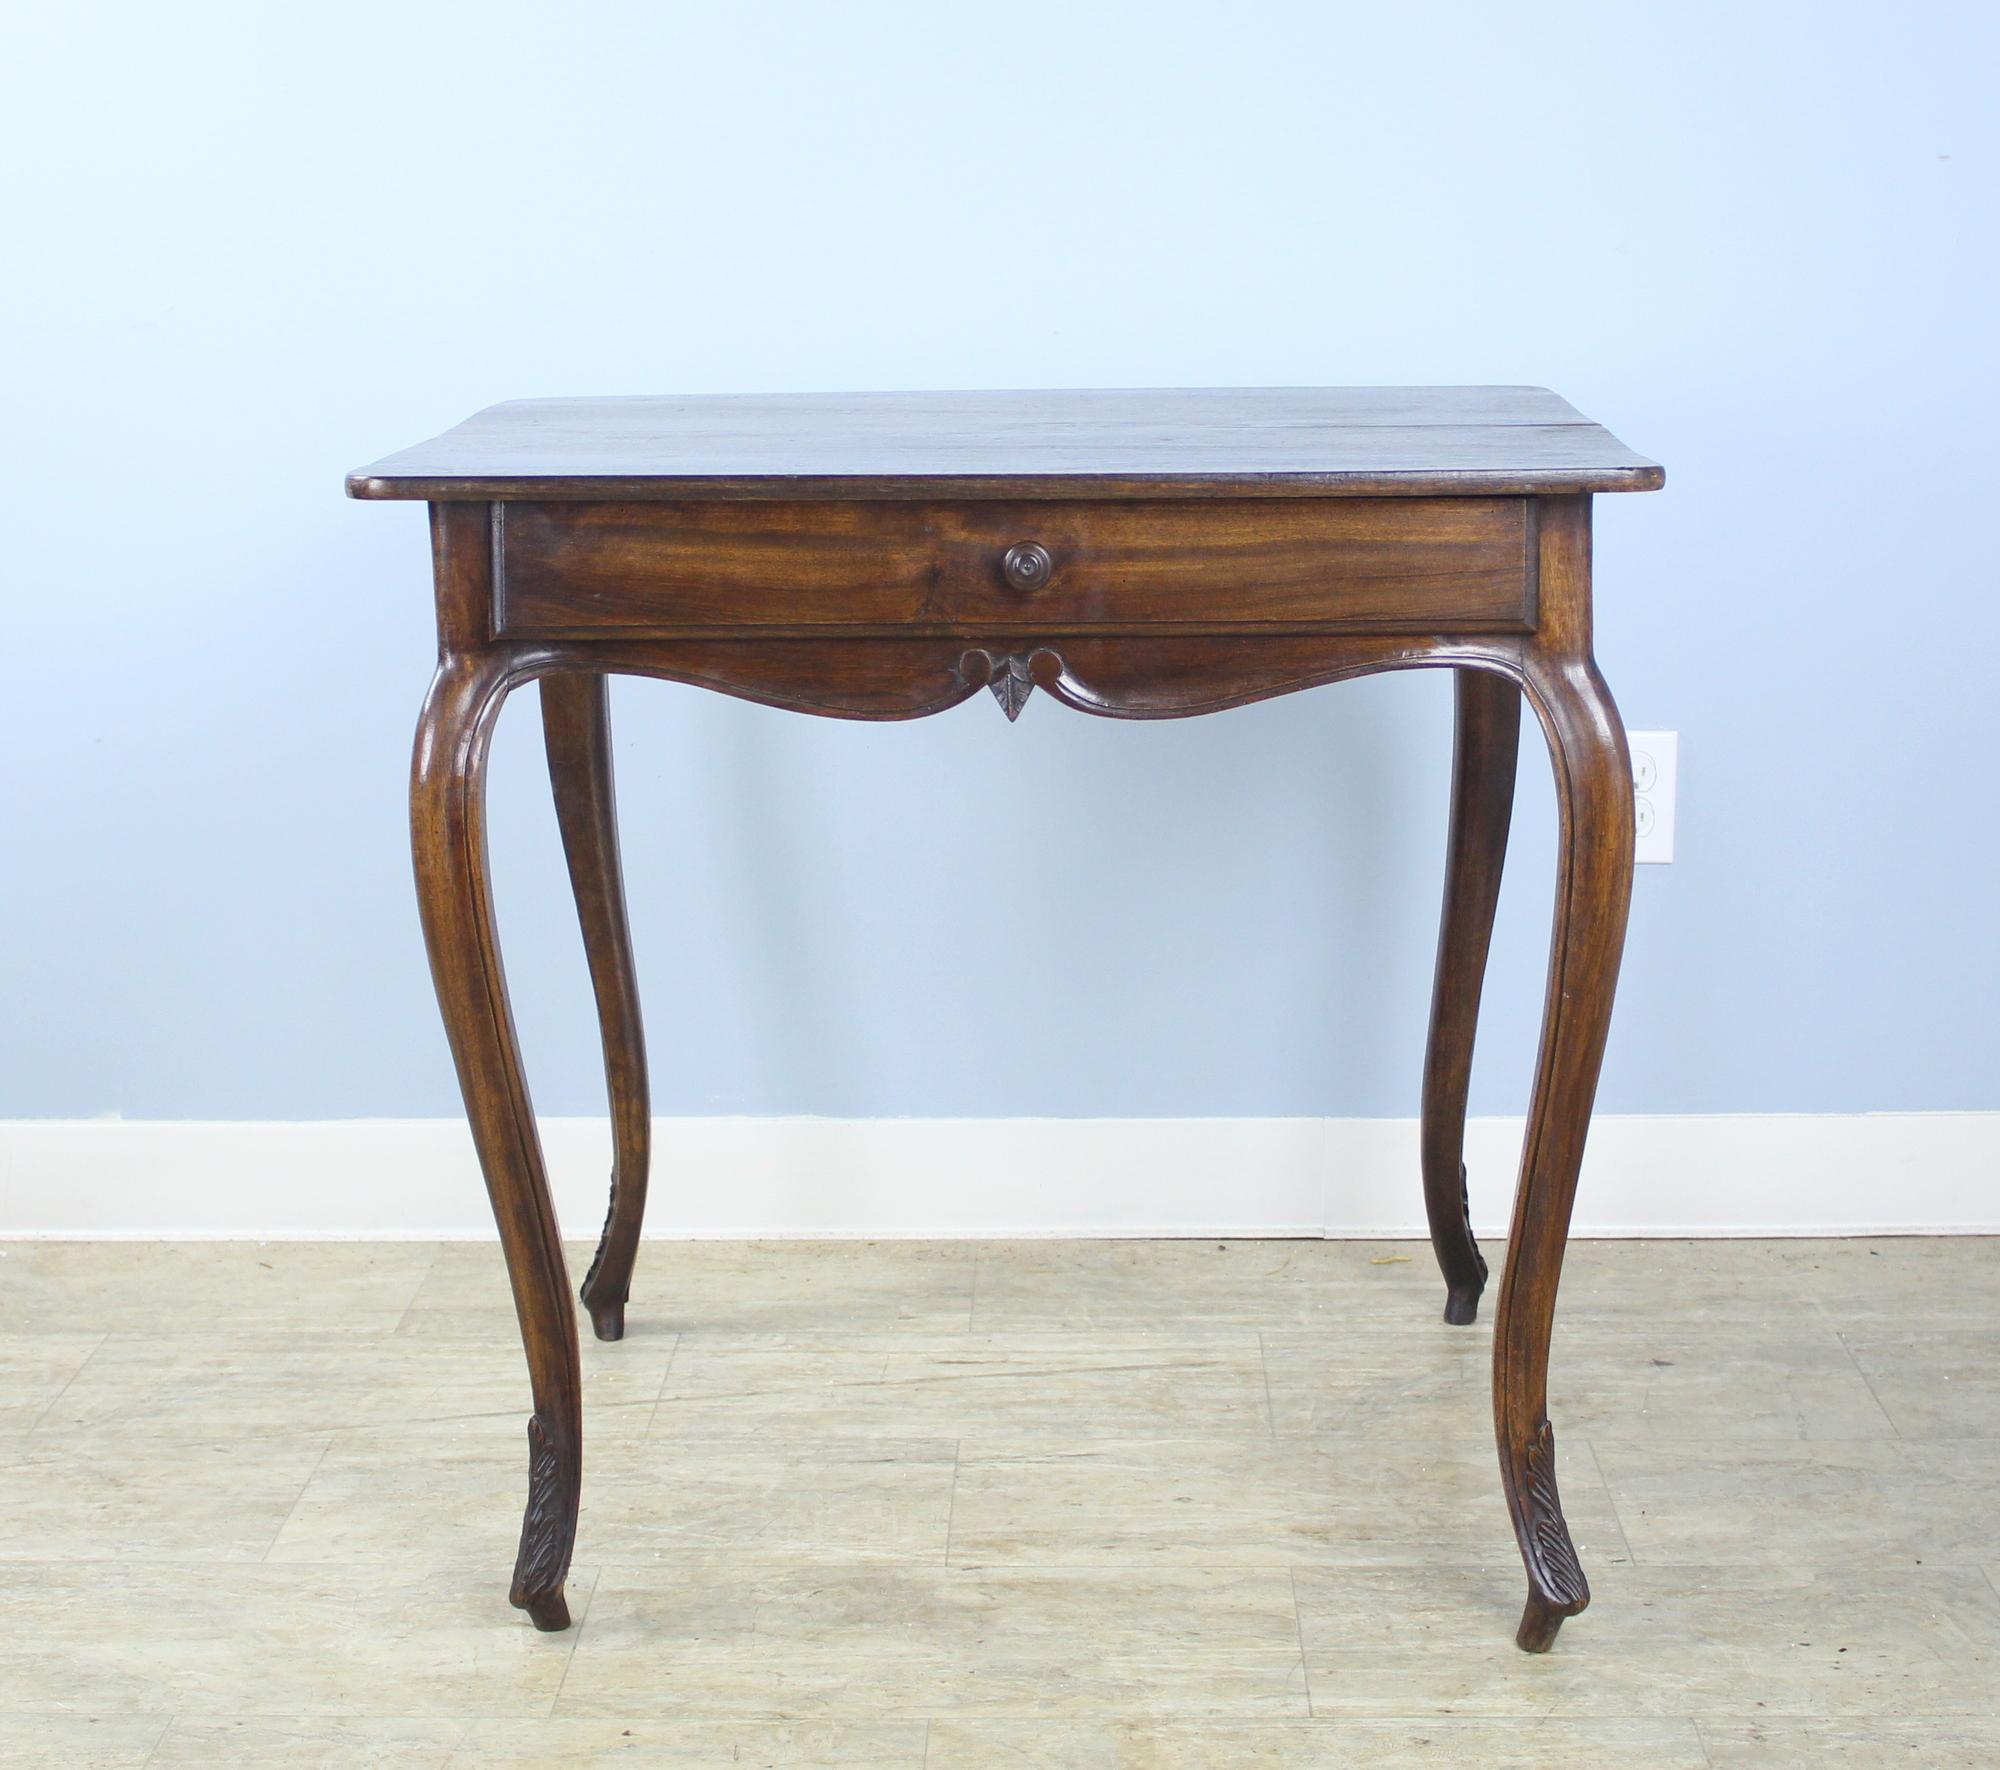 A graceful dark walnut side table with cabriole legs and articulated carved feet. We love the quirky offset knob on the drawer.